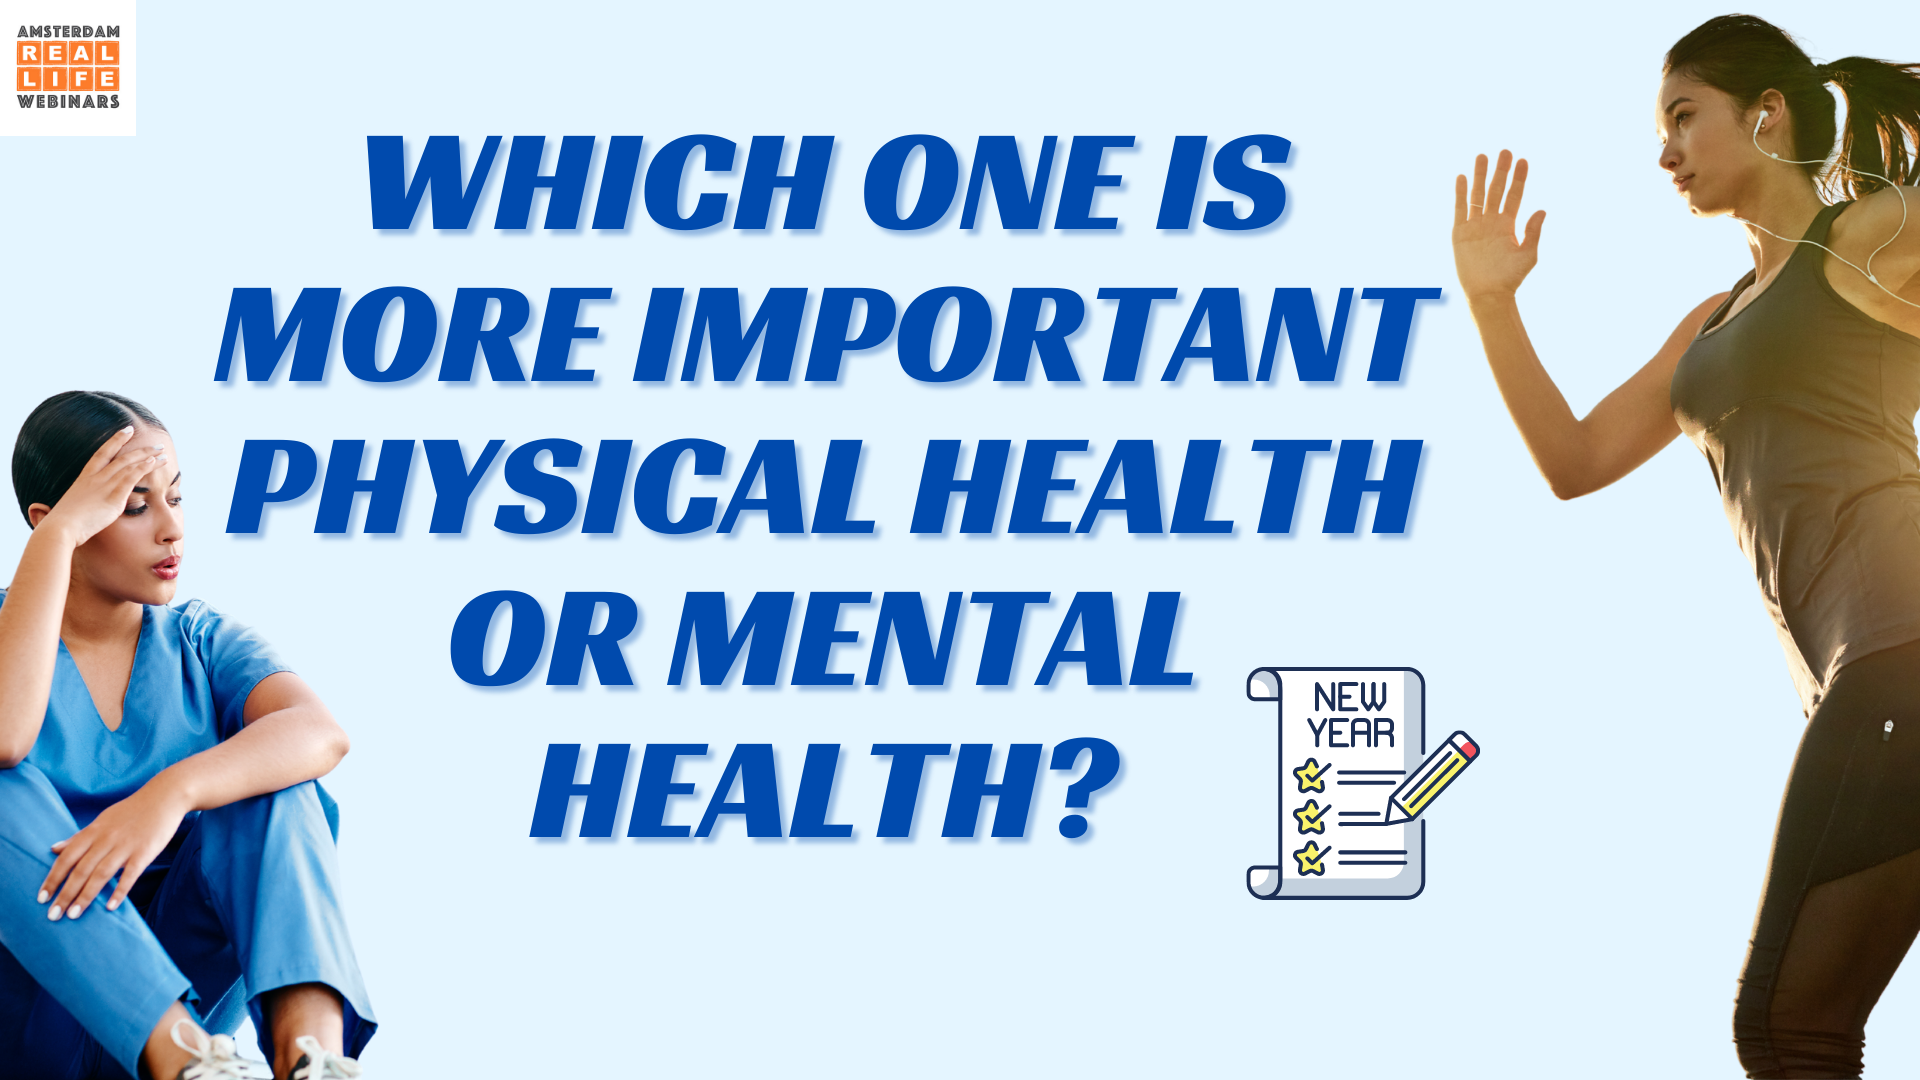 Which one is more important physical health or mental health?